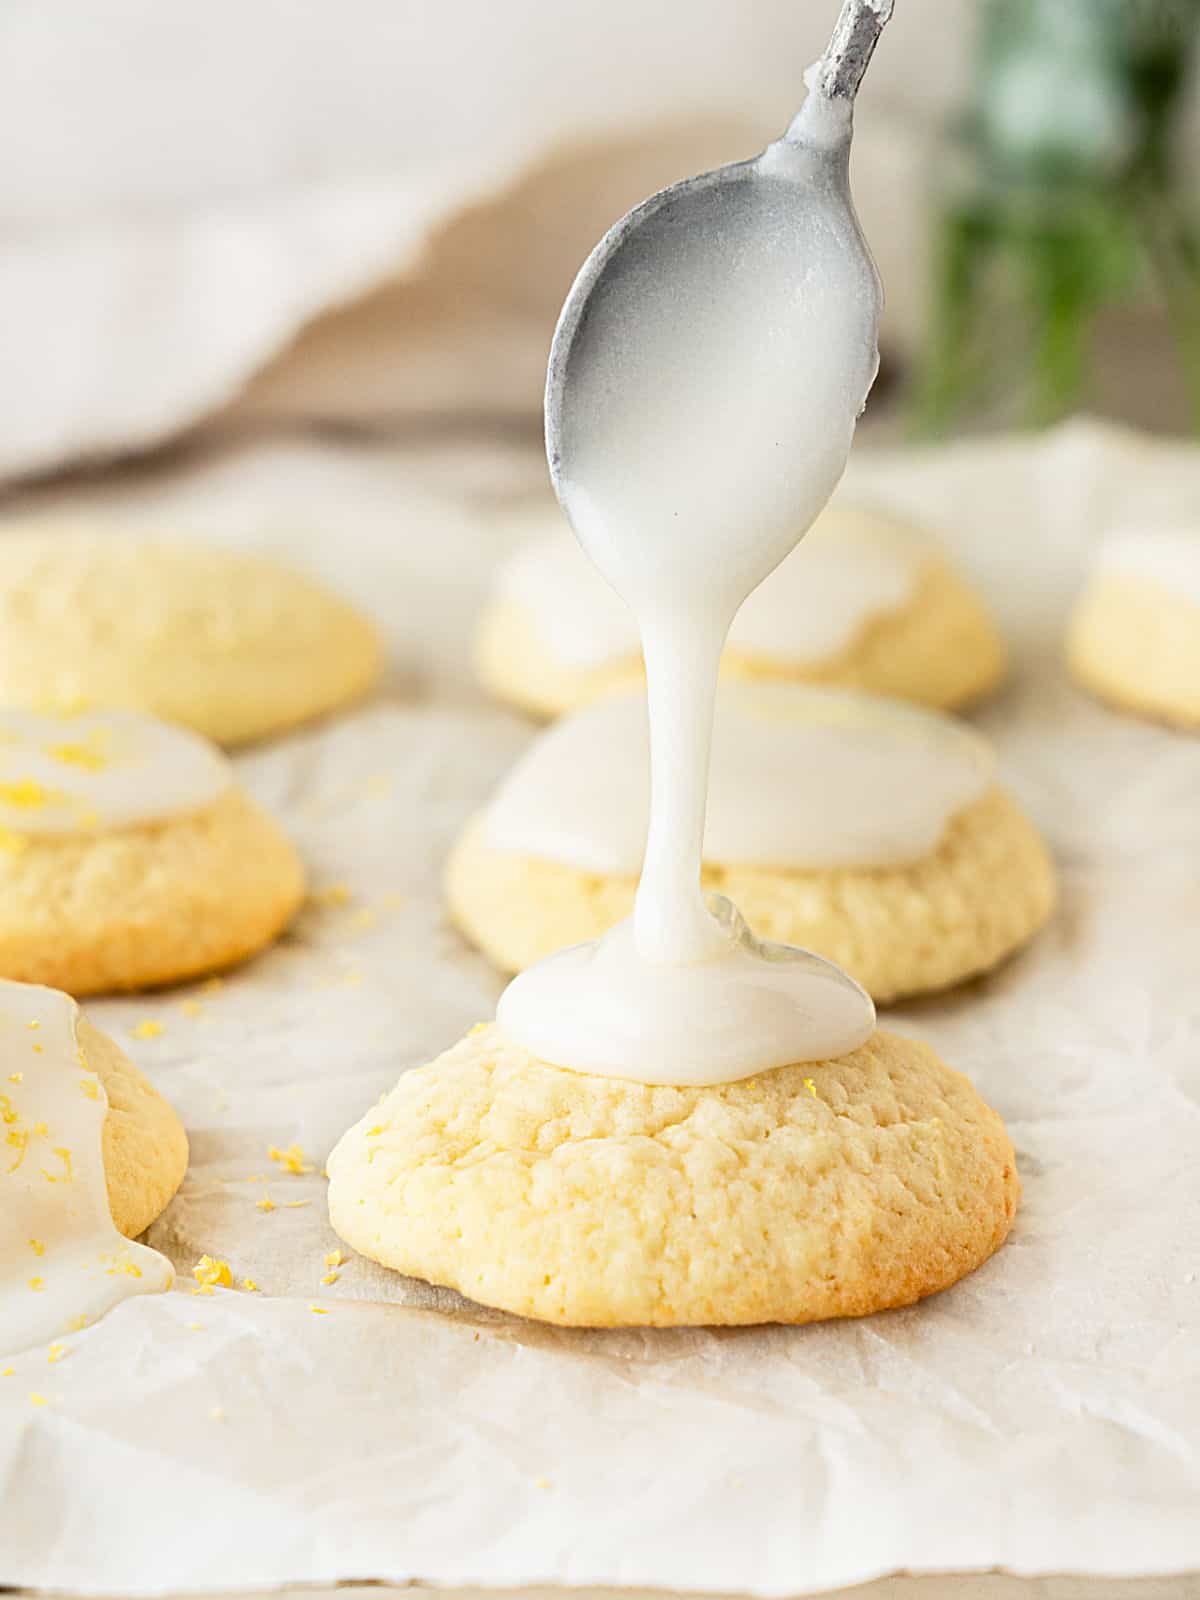 Glazing a ricotta cookie with a spoon. White parchment paper surface.